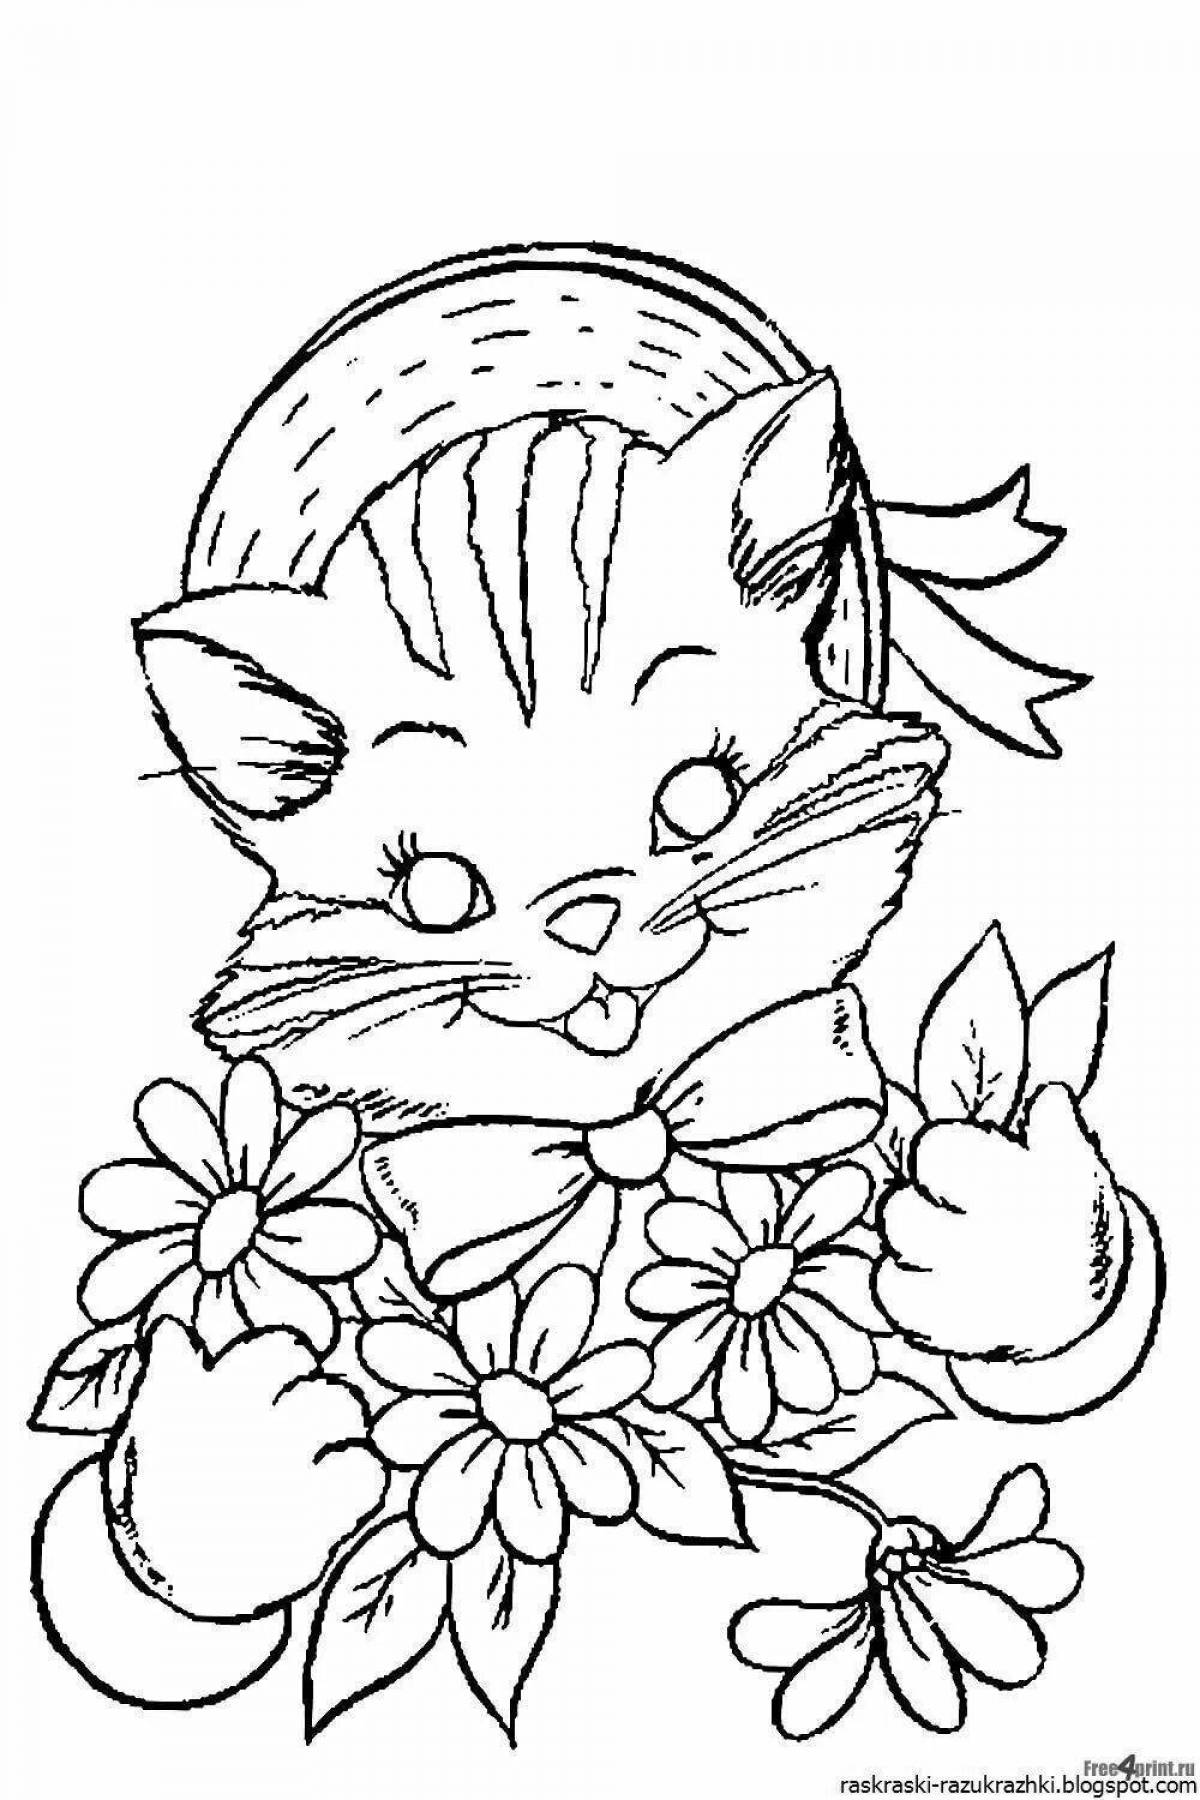 Glowing coloring pages for girls, cats and kittens